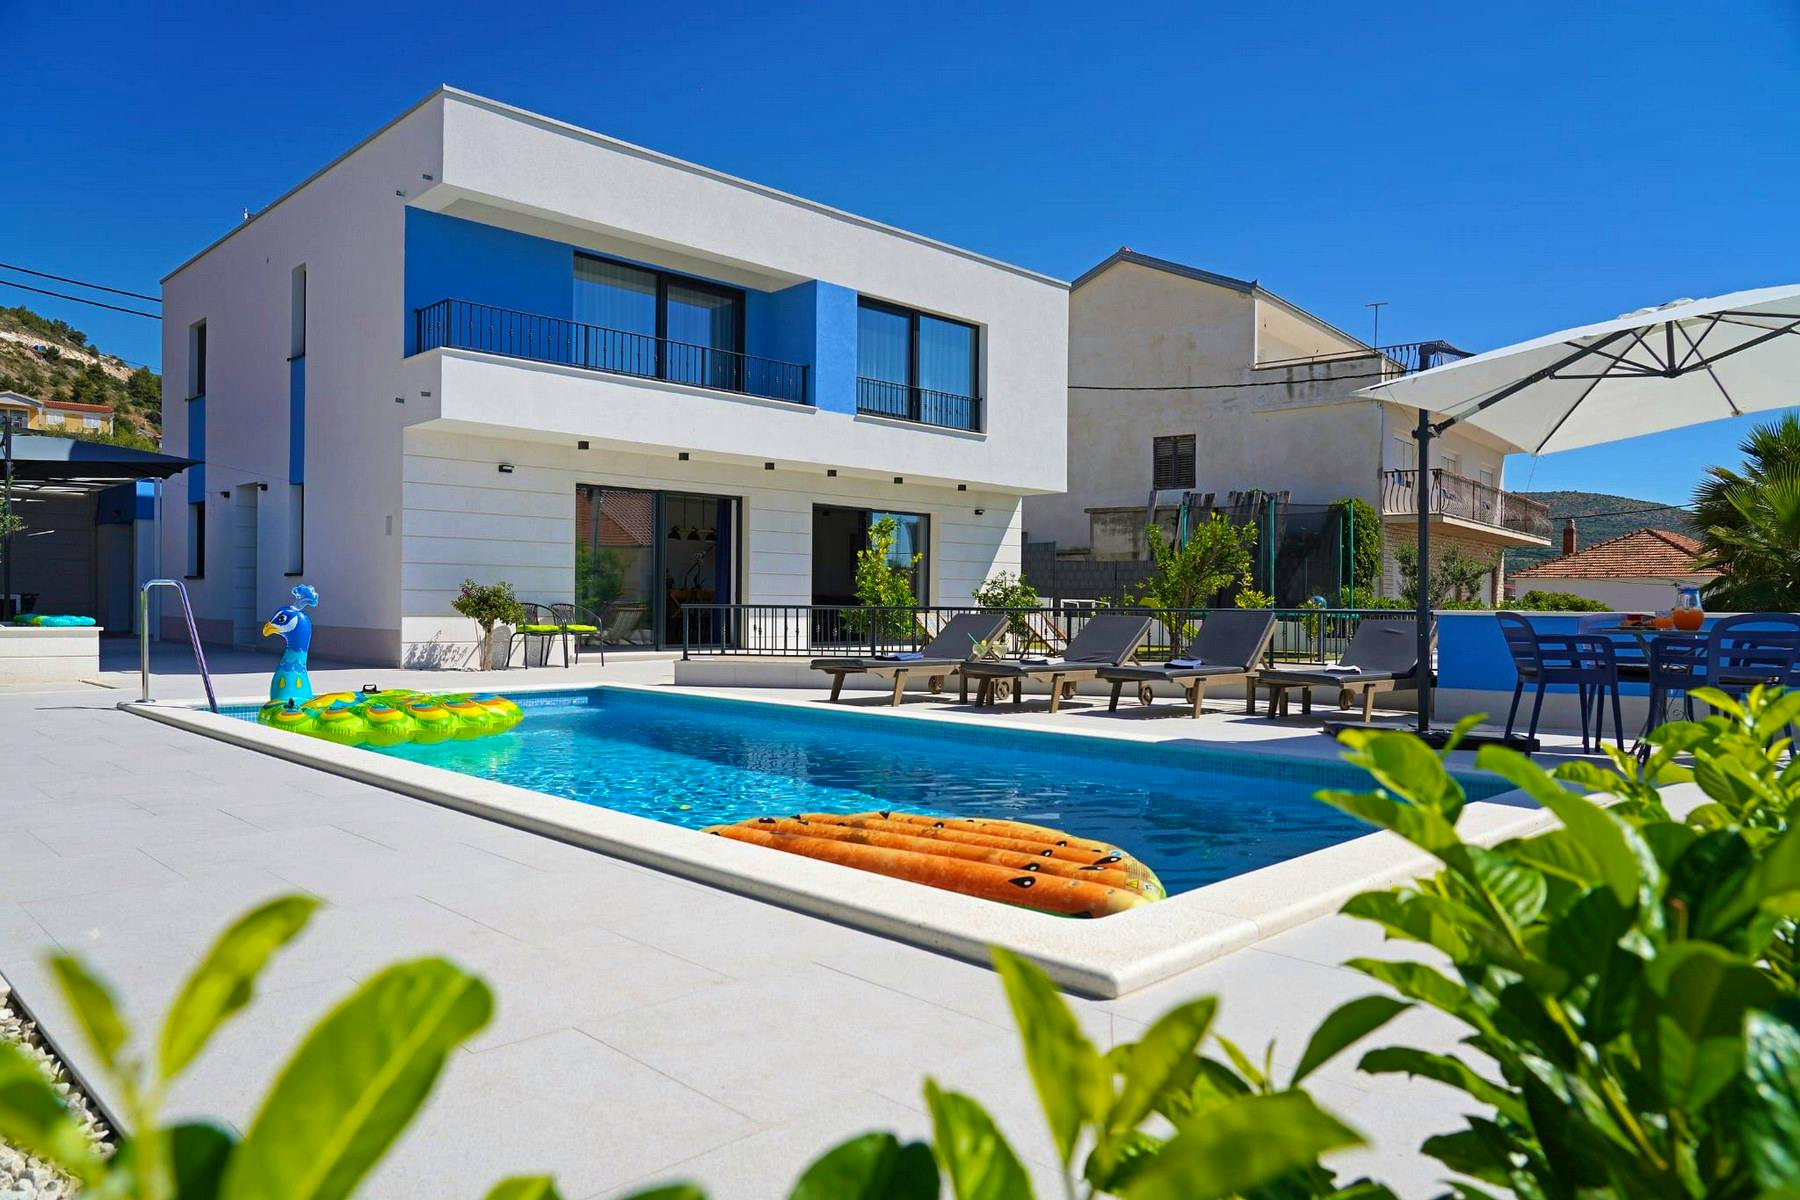 Modern villa with stone elements and swimming pool